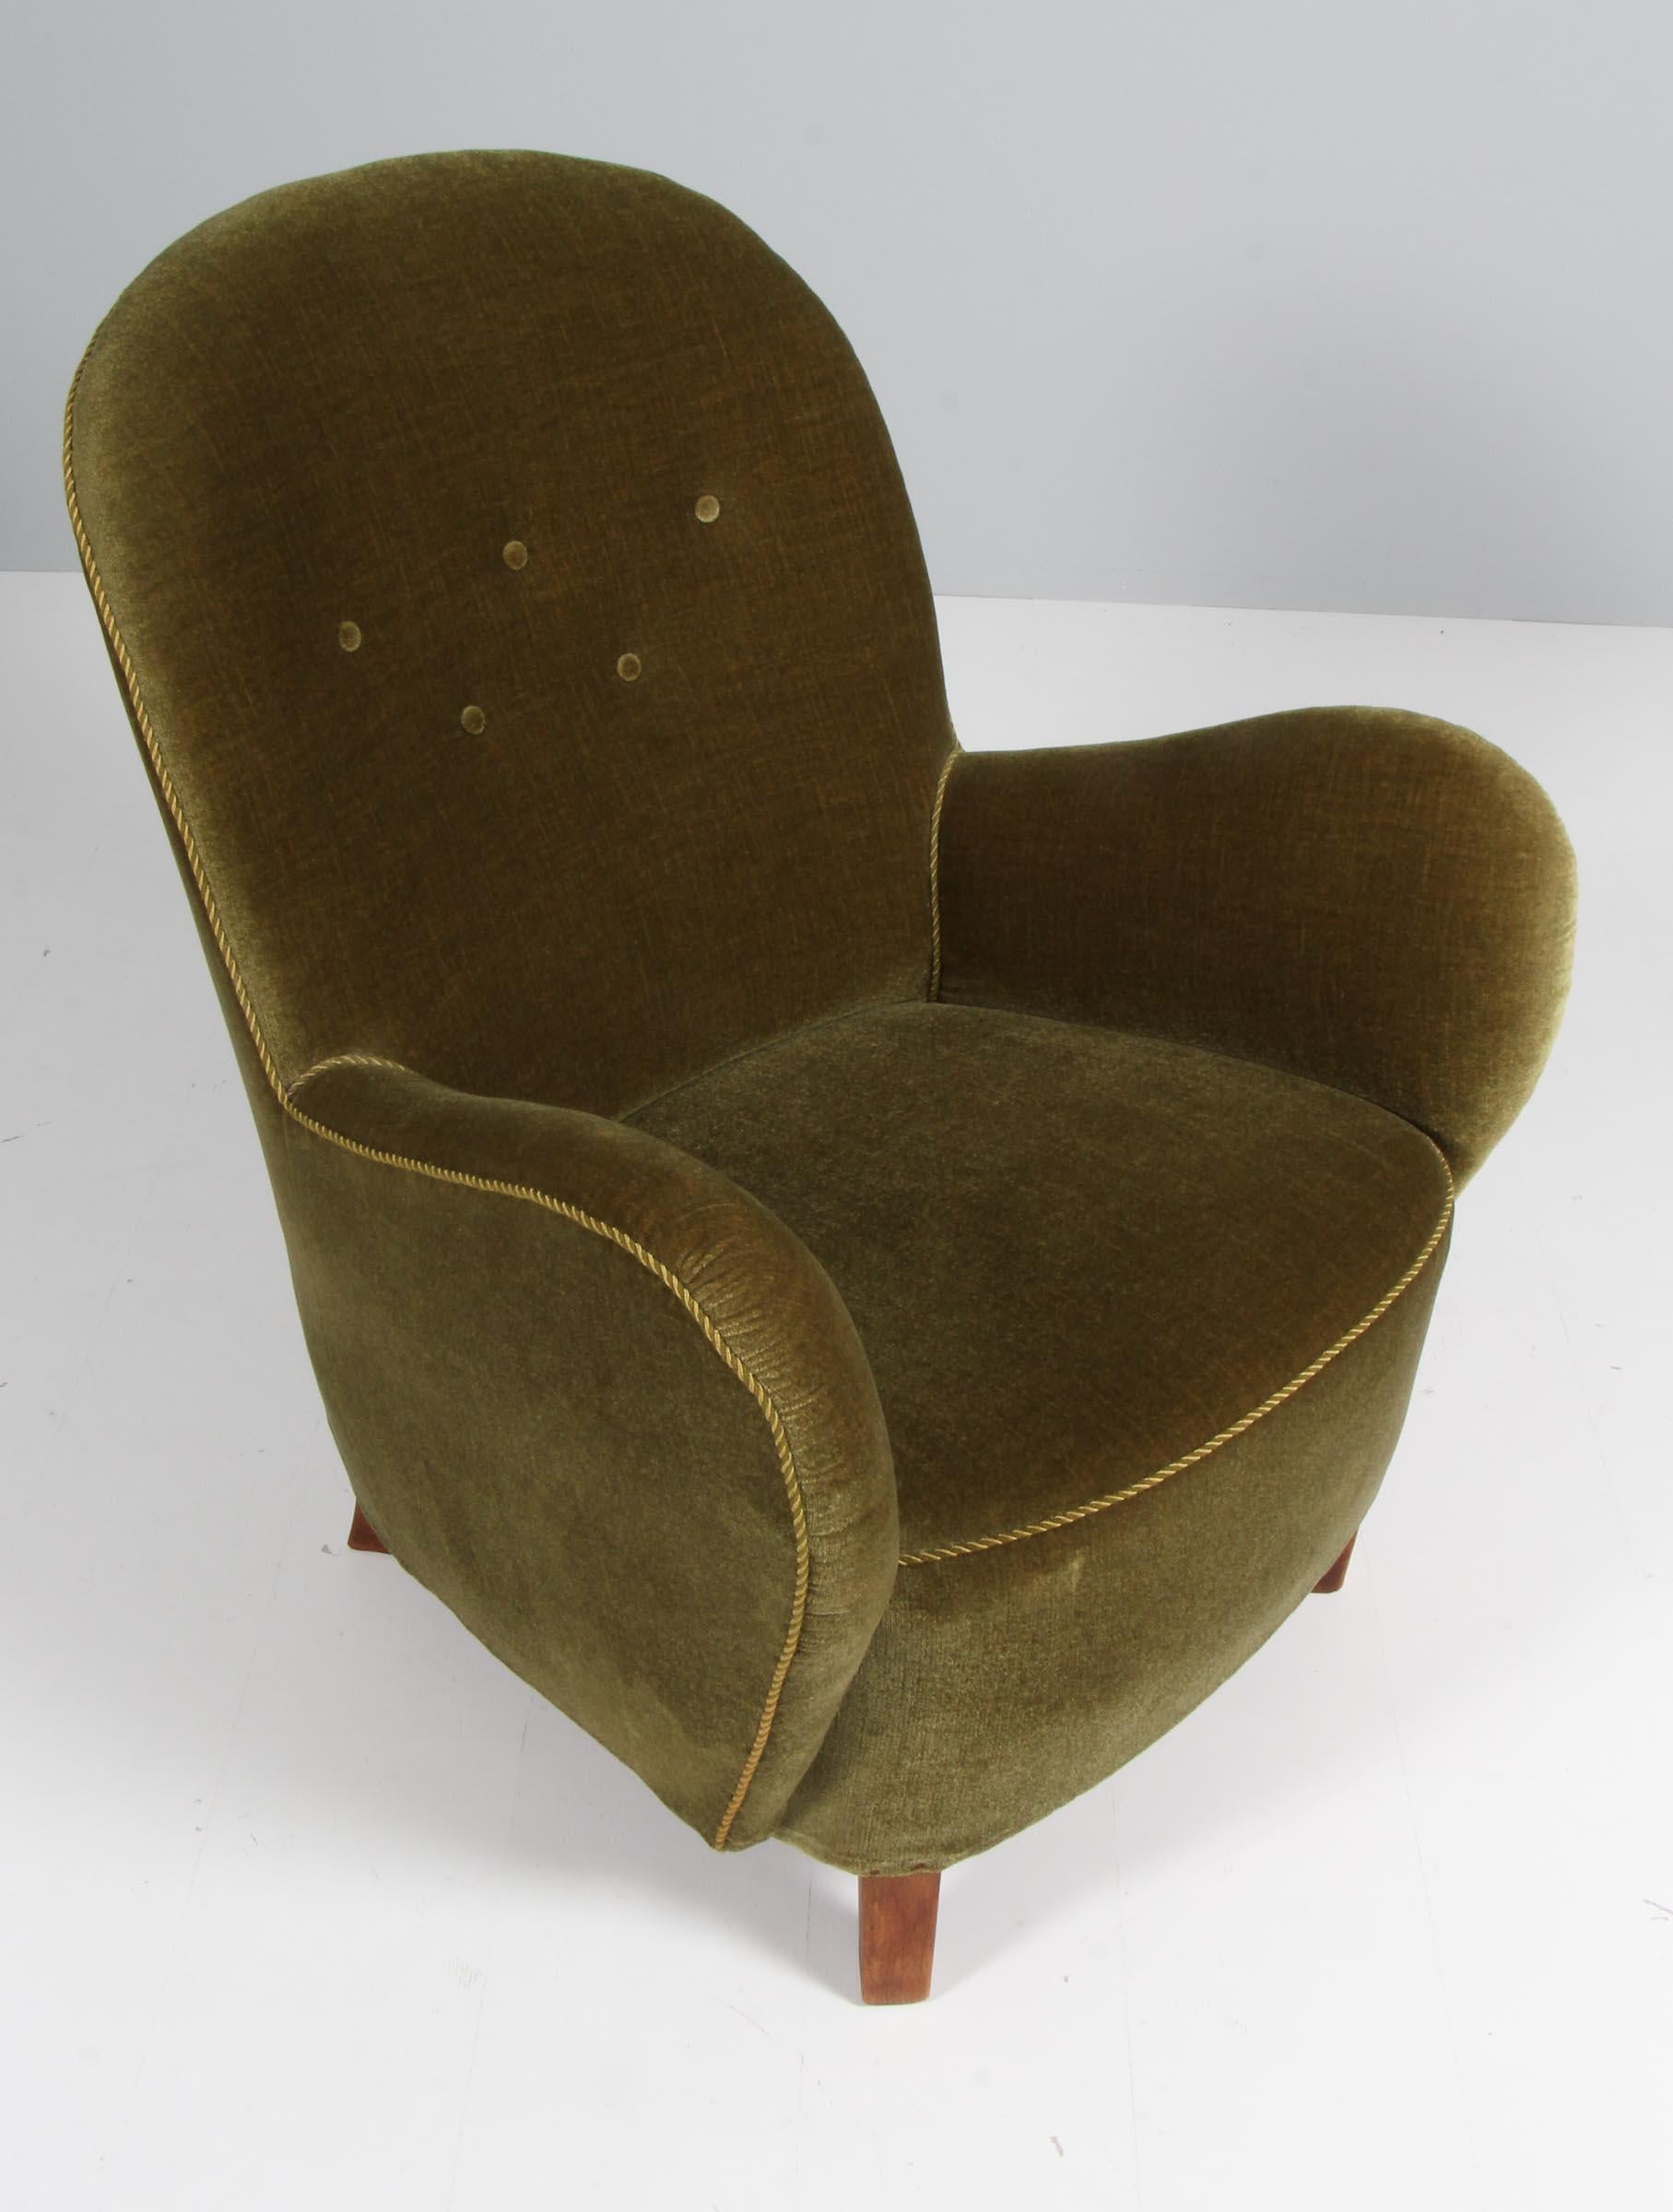 Georg Kofoed lounge chair in original velvet with buttons.

Legs of stained beech.

Made by Georg Kofoed in the 1940s.